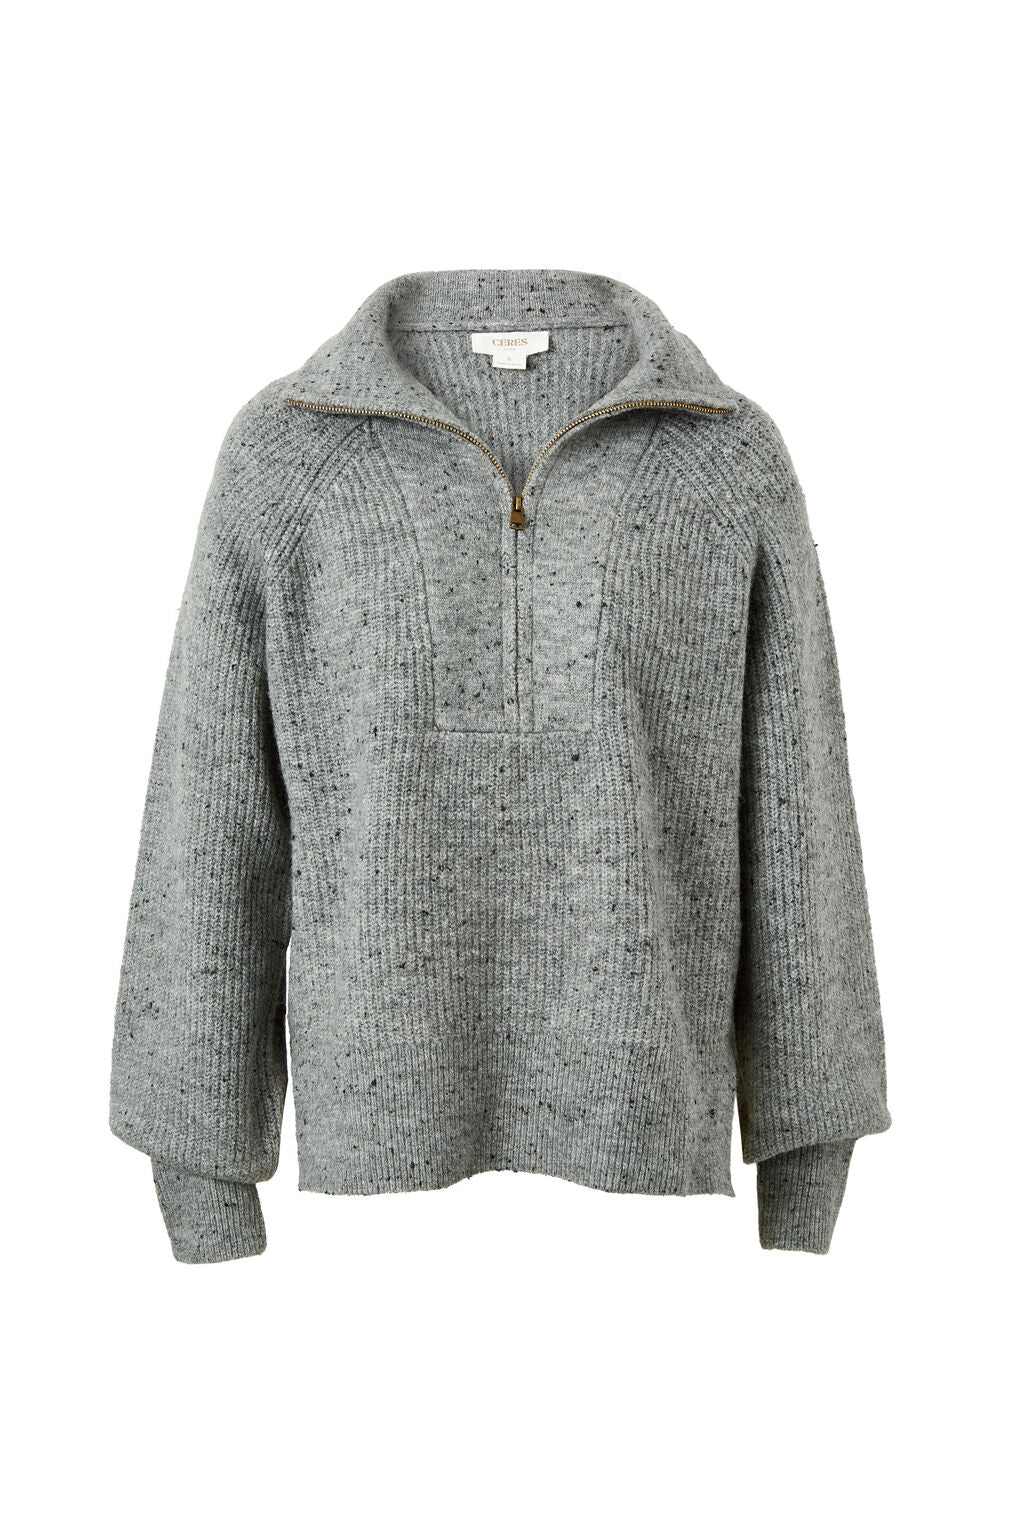 Slouchy Zip Knit - Mid Grey